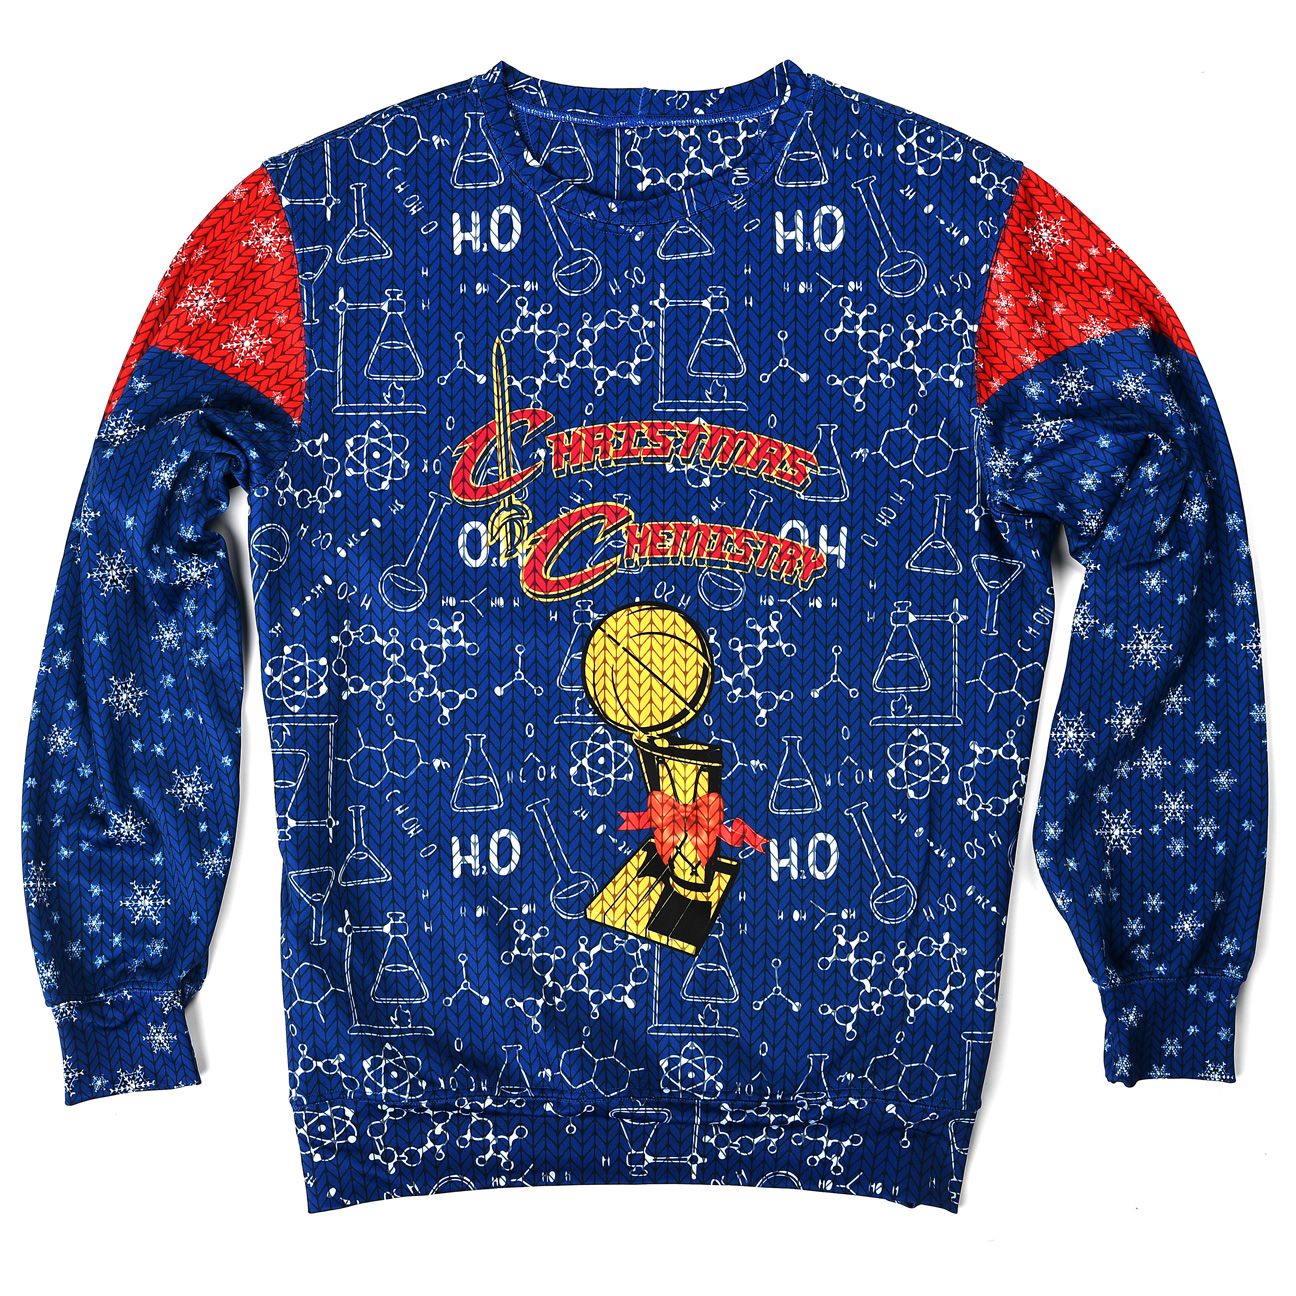 Cavaliers ugly sweater